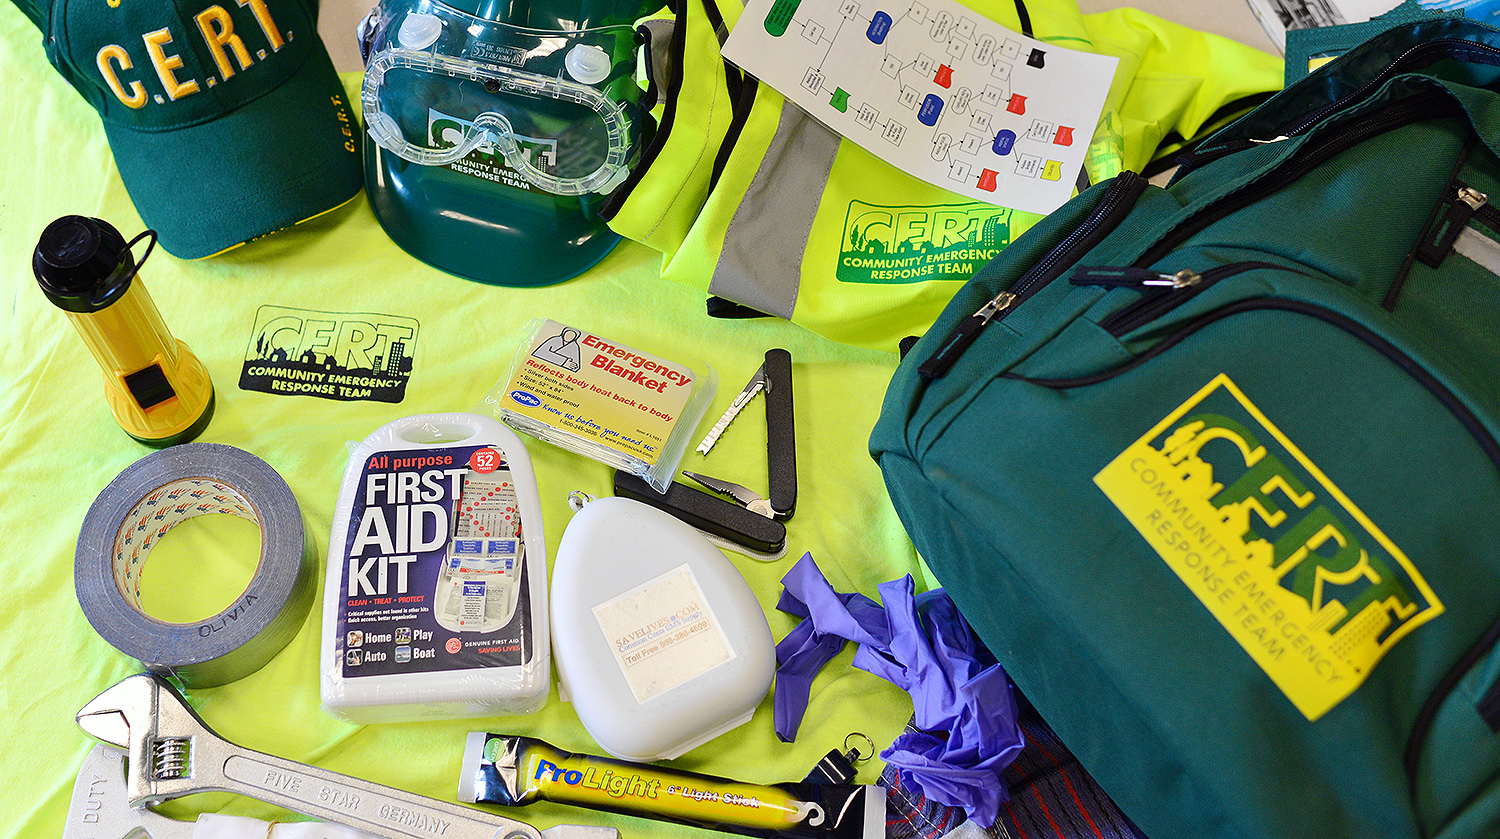 C-CERT members are equipped with a supply backpack, which includes a helmet, reflective vest, safety goggles, first-aid kit, emergency blanket, CPR kit, light sticks, gloves, tape, tools, knives and more. 